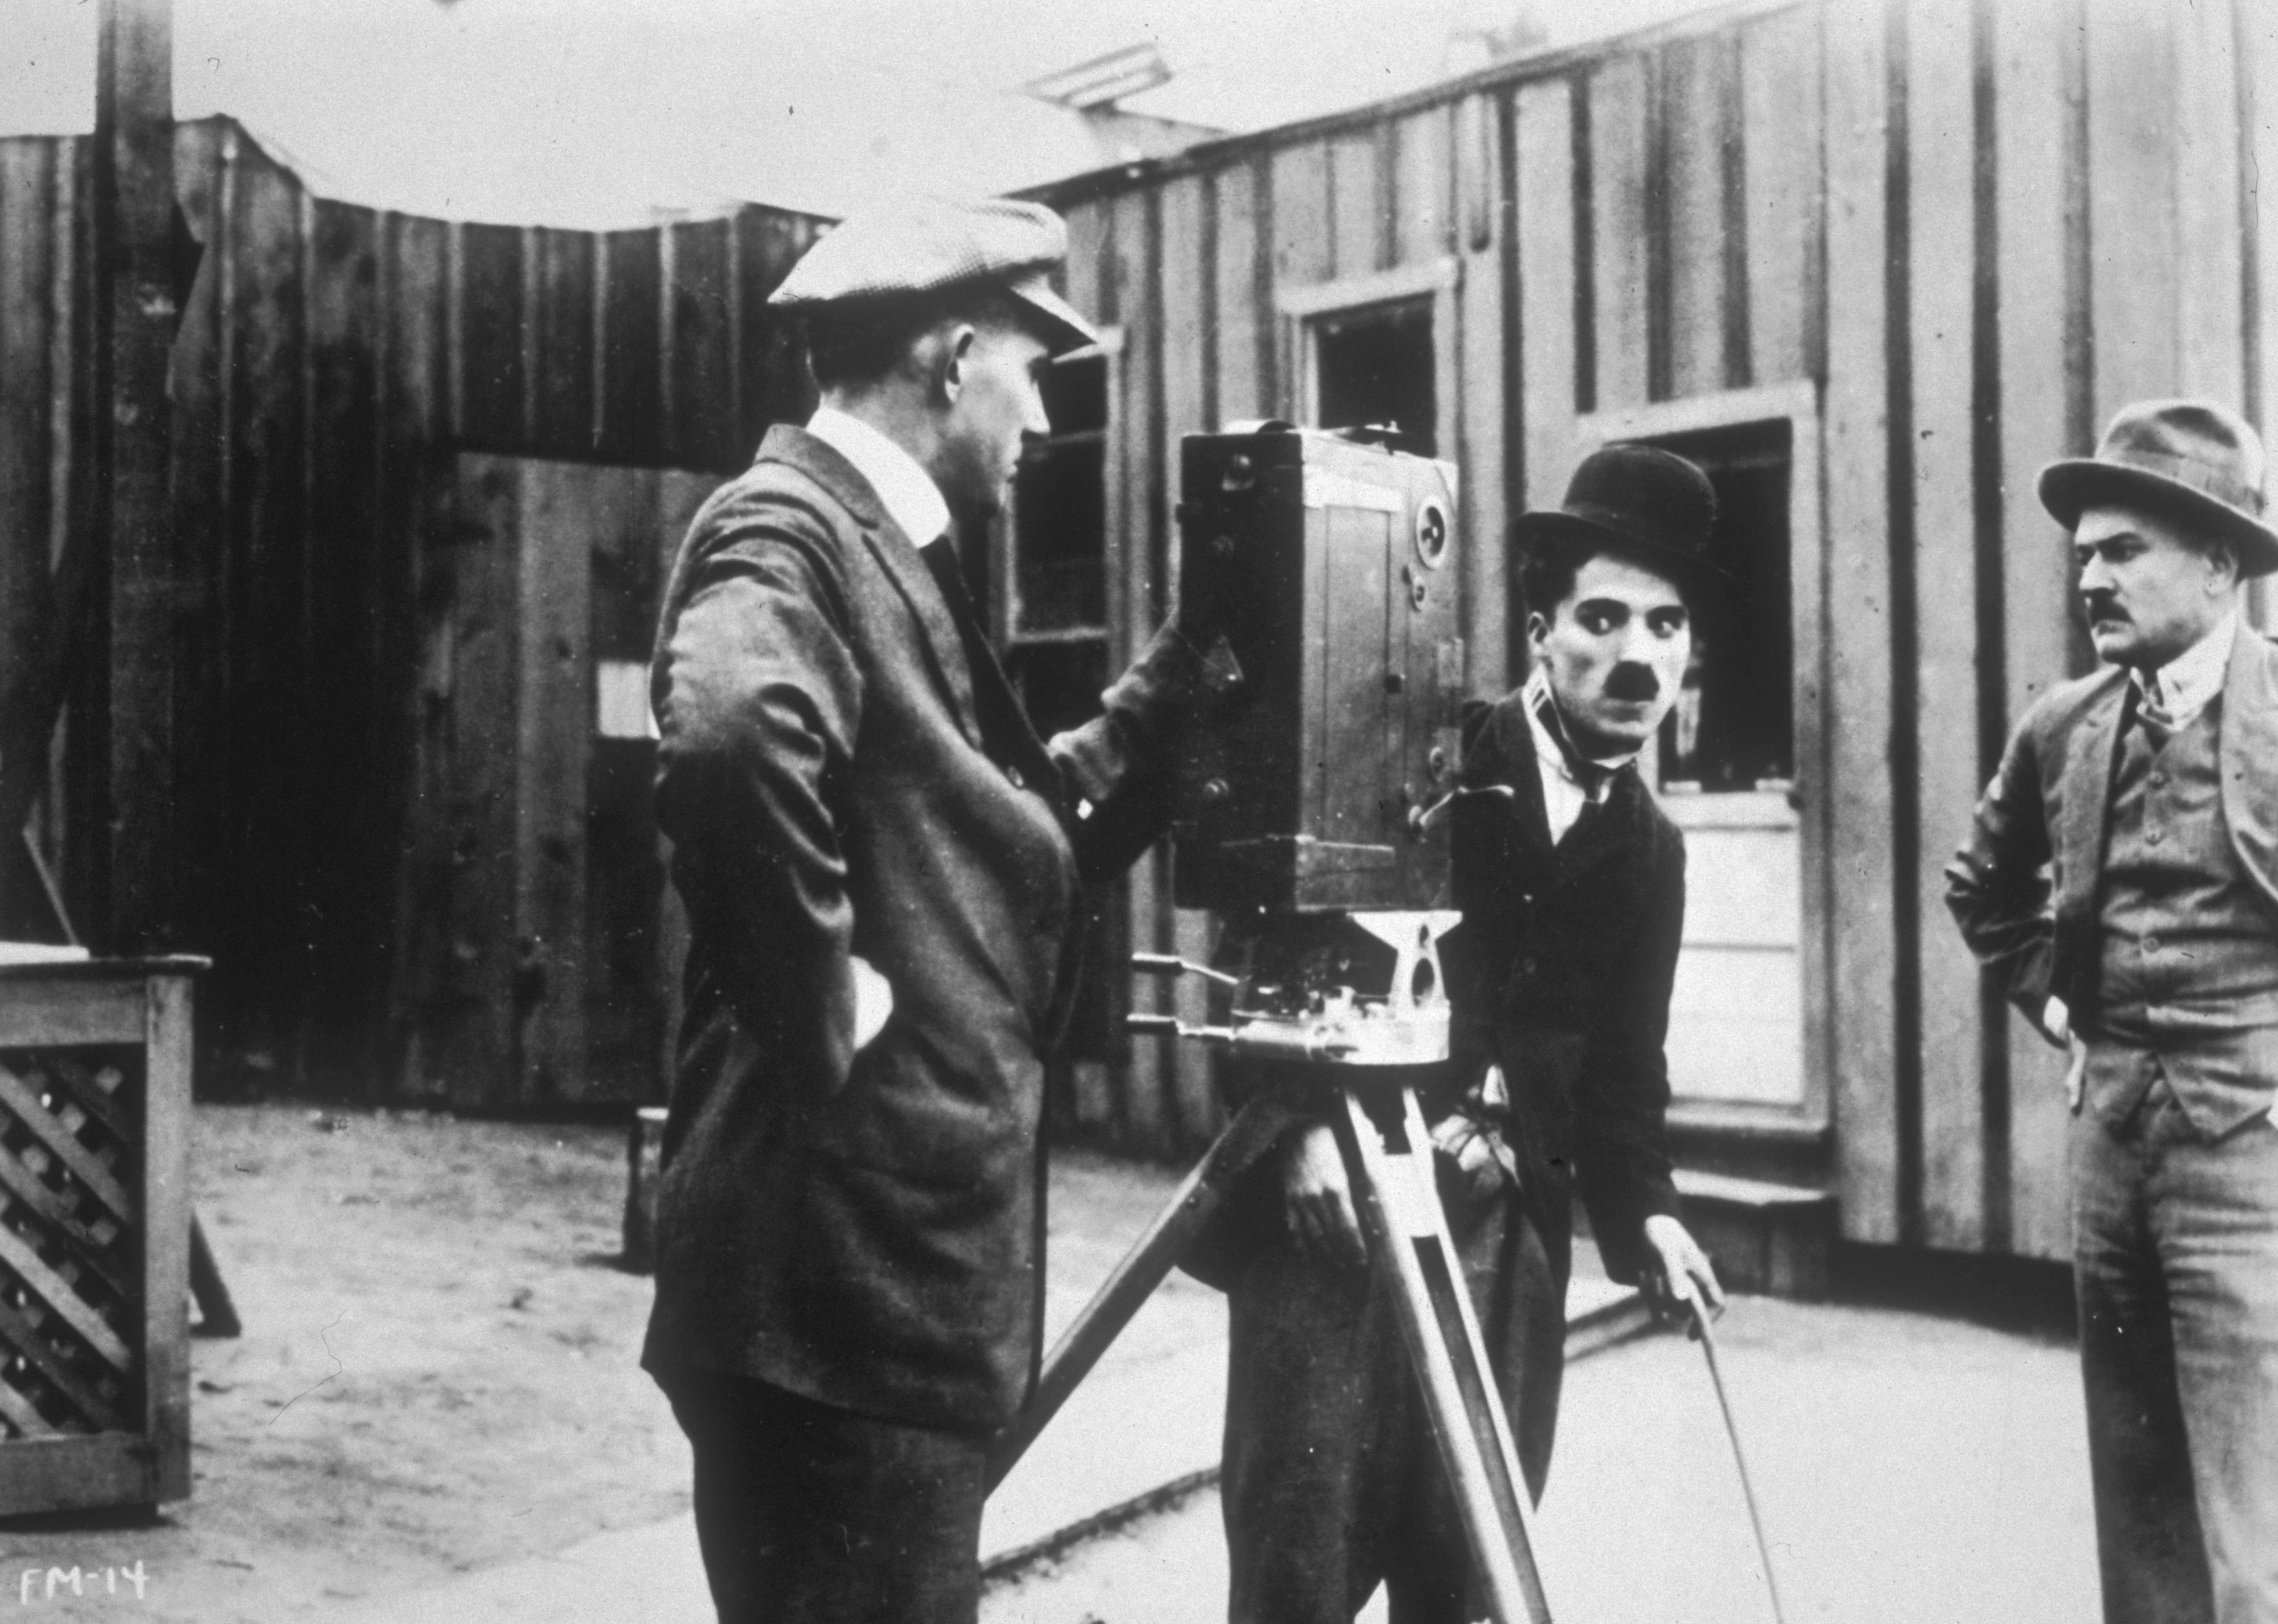 Charles Chaplin in costume as the Tramp, looks into a movie camera as two cameramen stand by.